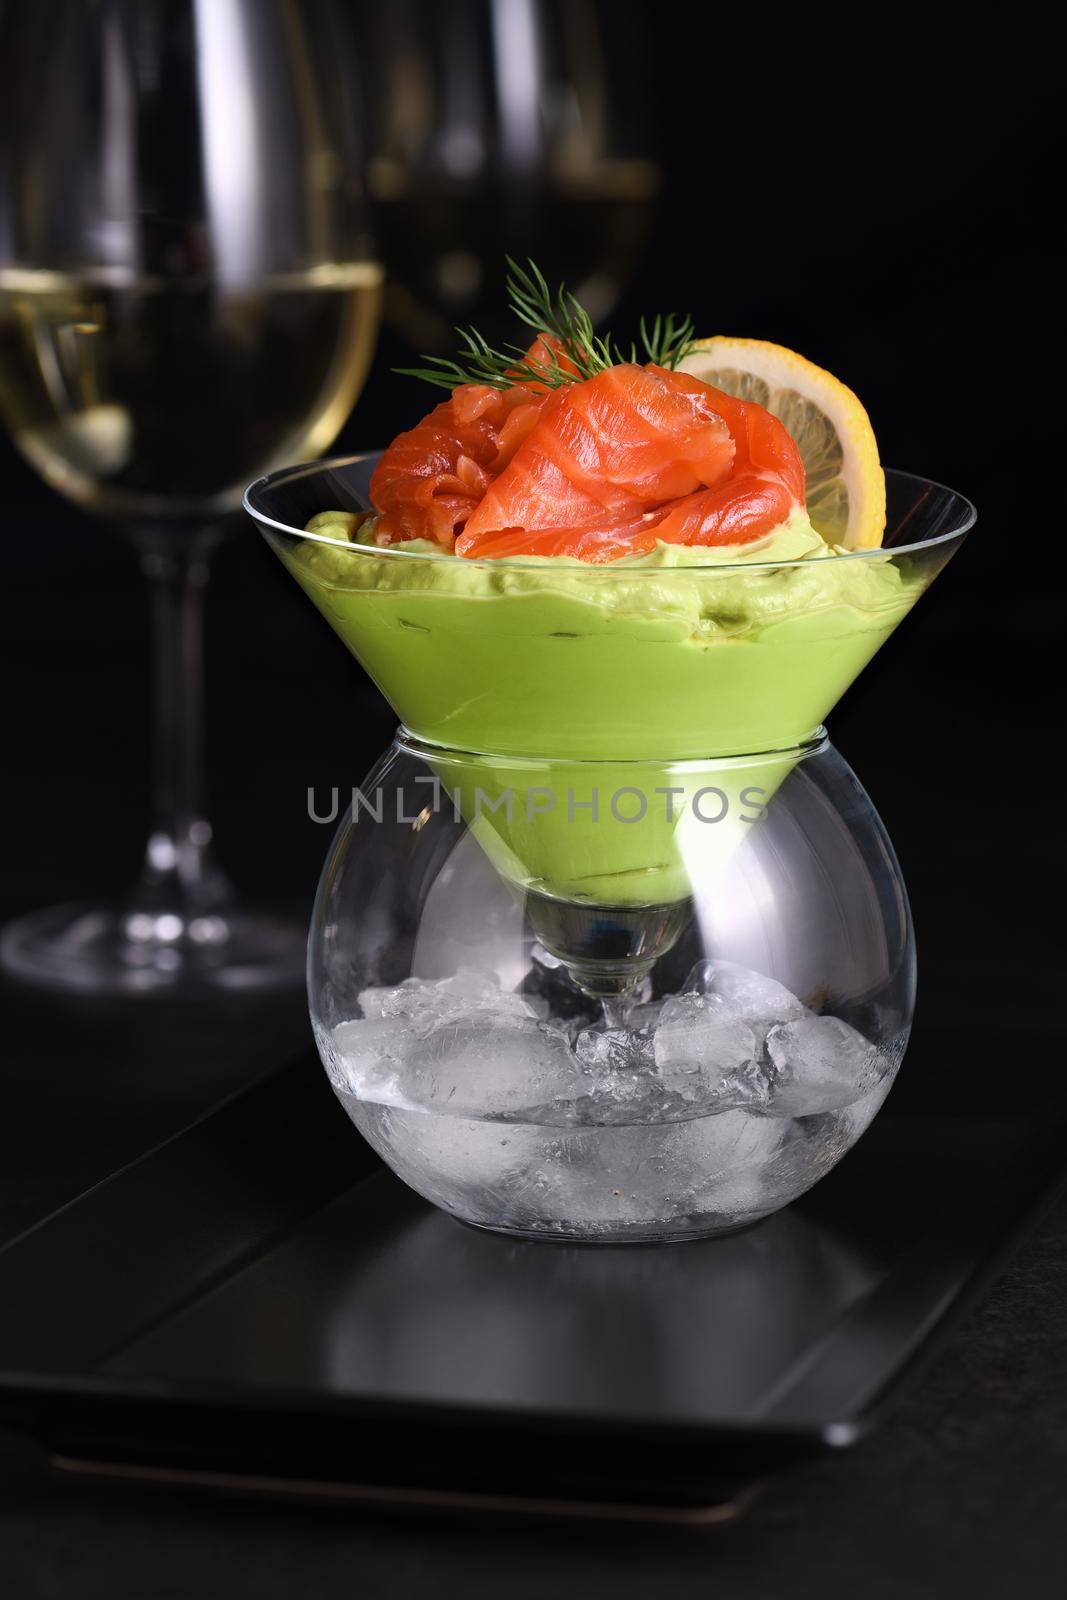 Taste is a combination of avocado pulp with a delicate texture of soft  cheese cream and salmon, with the addition of dill and a slice of lemon. Serving verrine in a Martini Chiller with ice. Aperitif appetizer